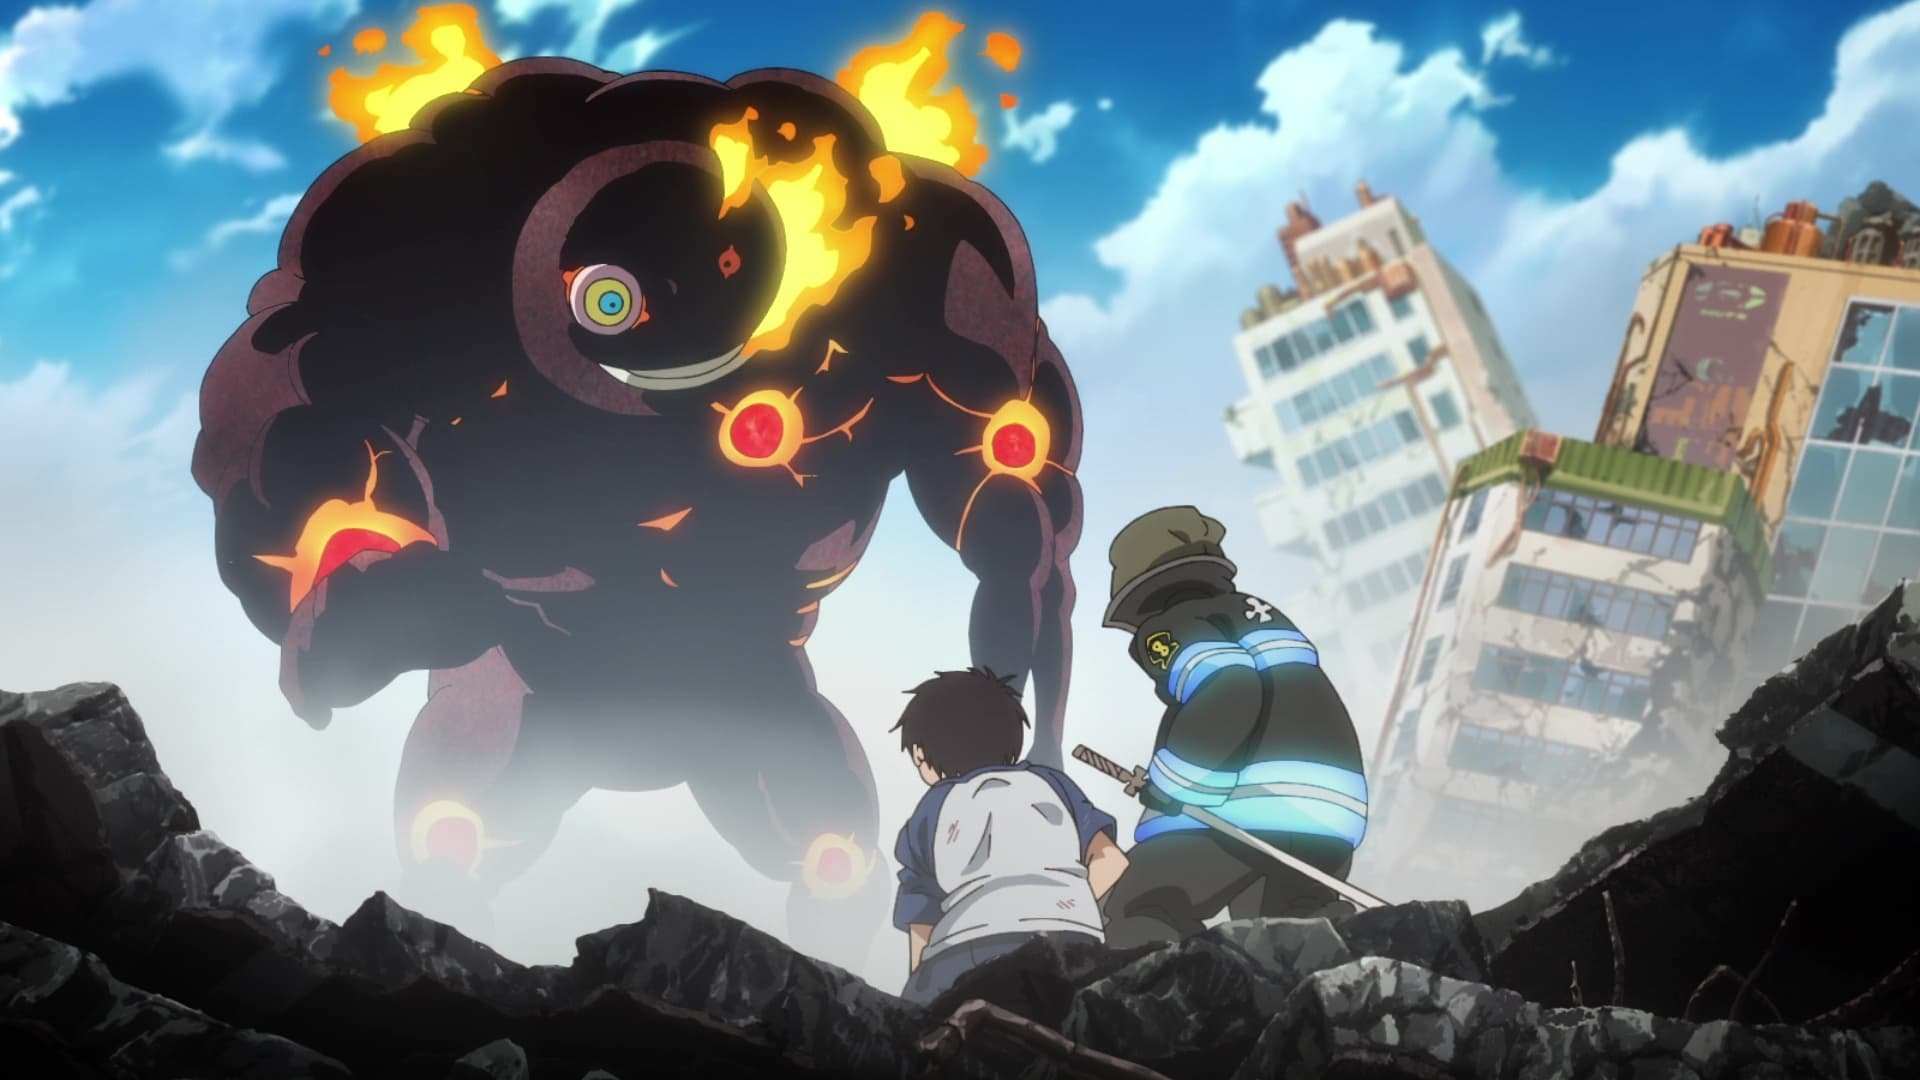 Fire Force : Affiche